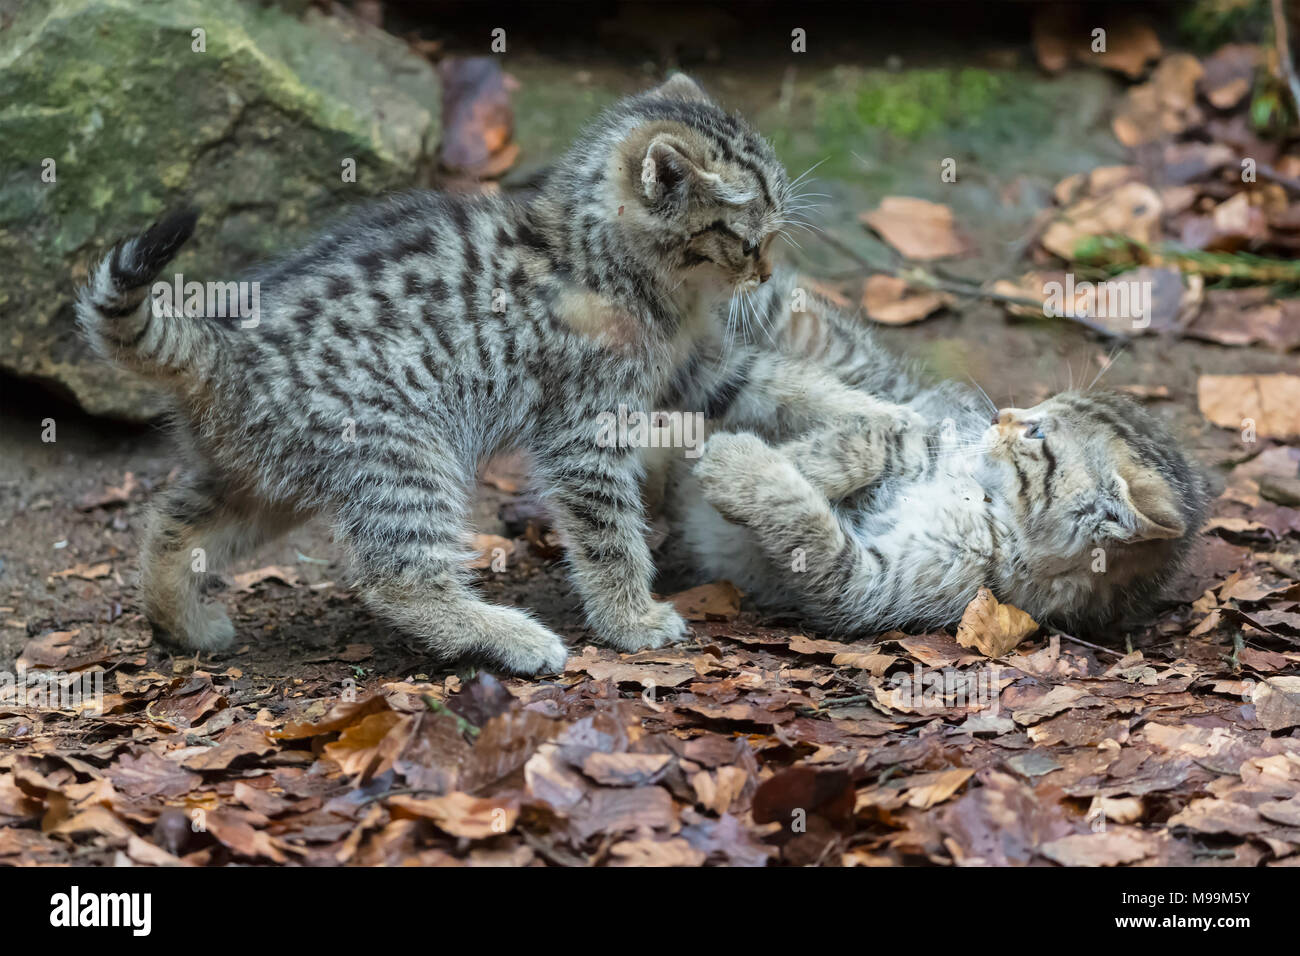 Germany, Bavarian Forest National Park, animal Open-air site Neuschoenau, wild cat, Felis silvestris, young animals playing Stock Photo